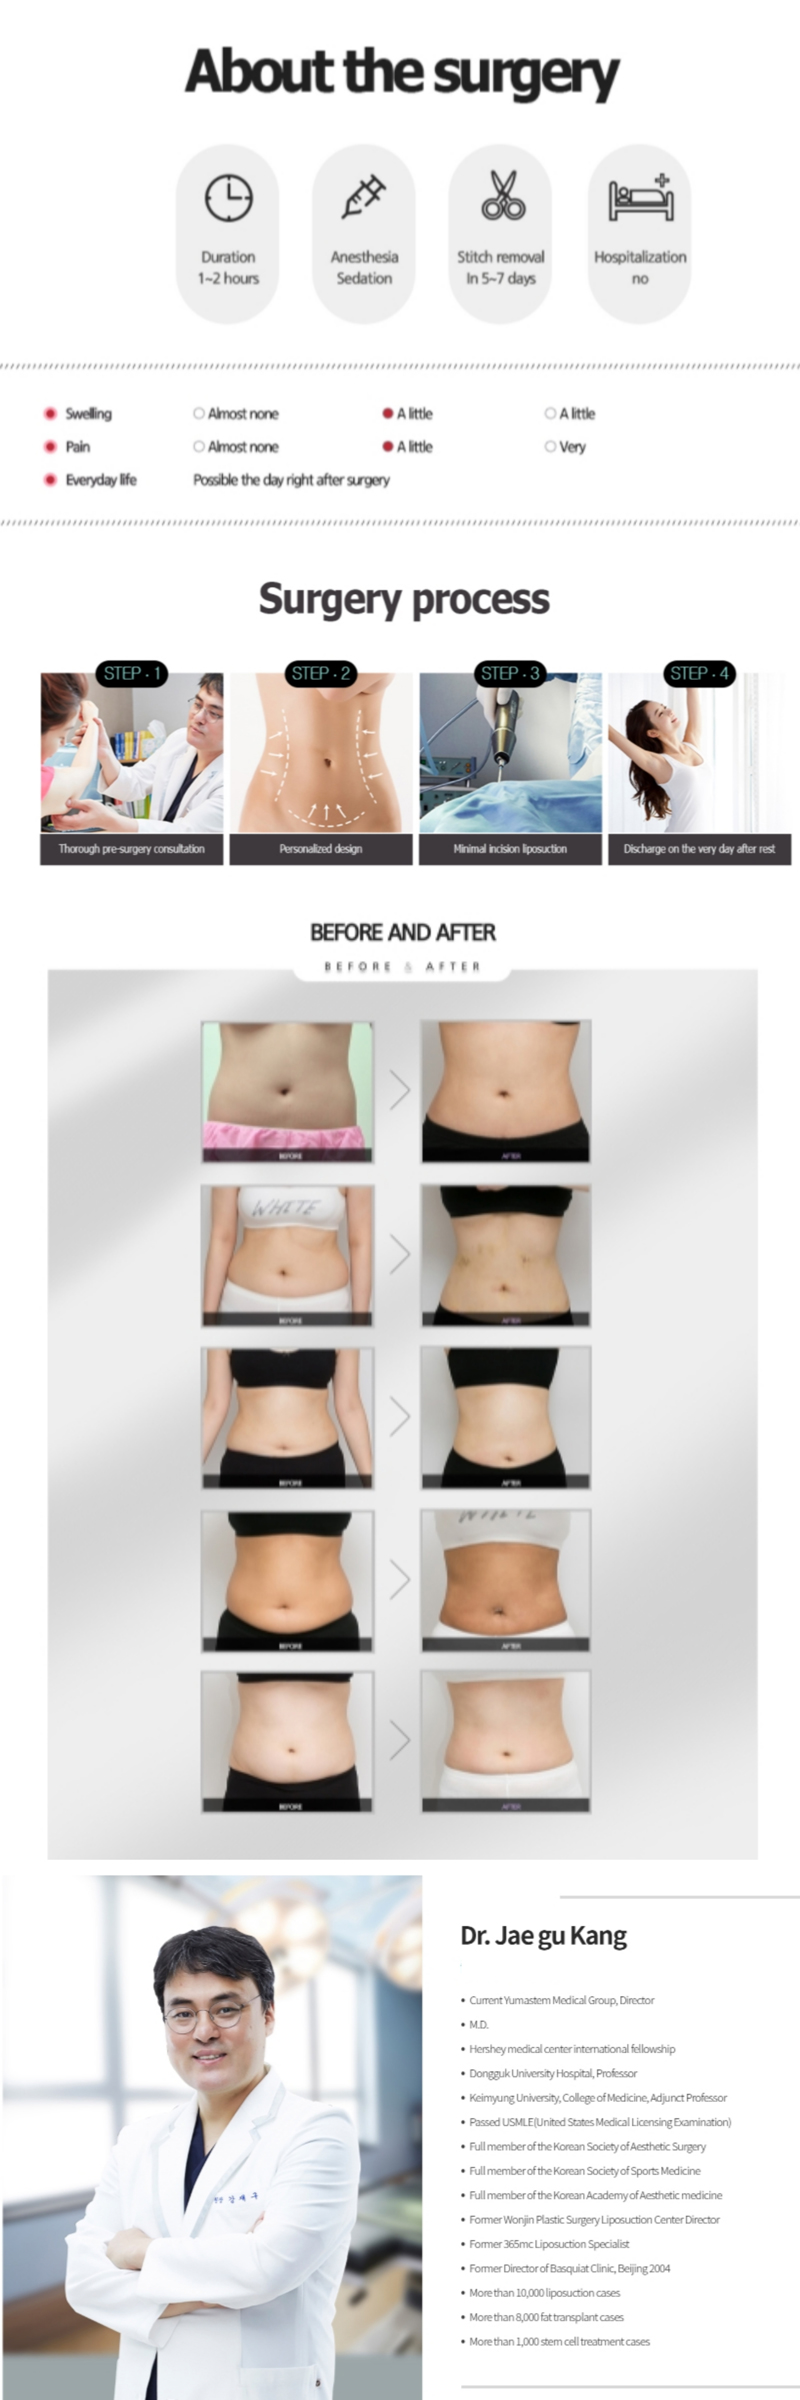 YUMASTEM clinic x AllaboutMEI special offer / promotion / mini liposuction